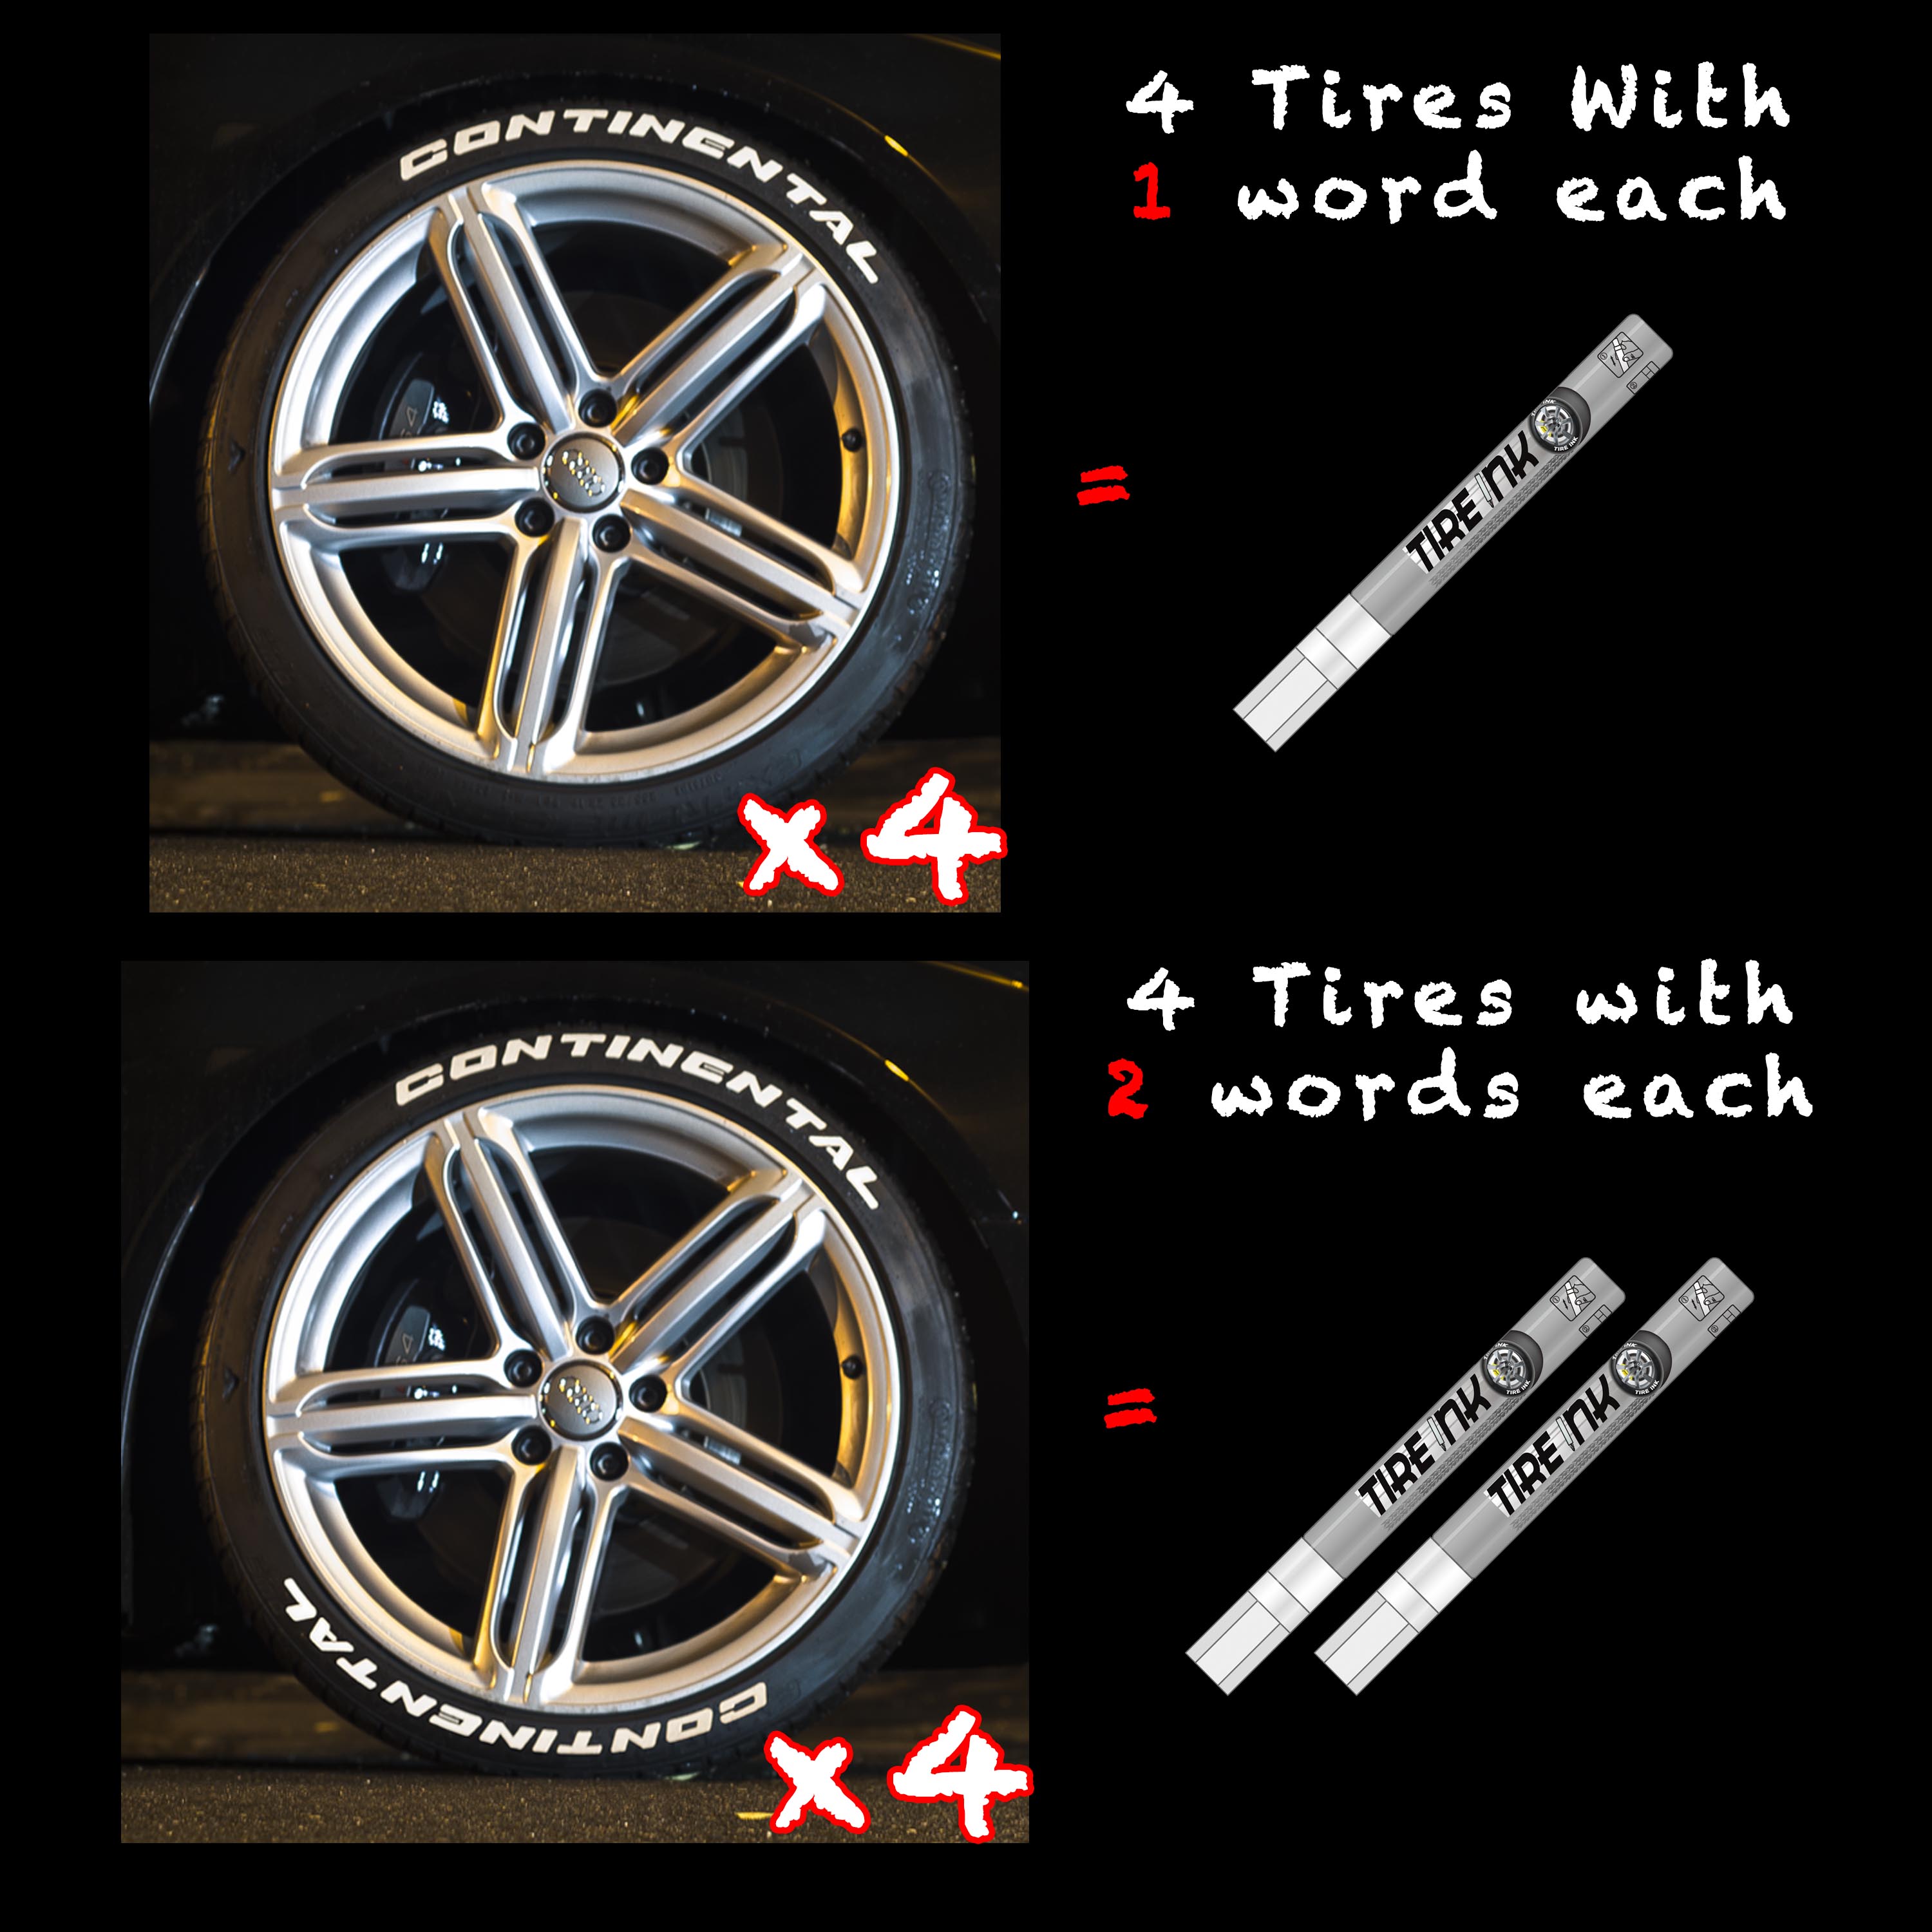 White Tire Paint Markers for Car Tire Lettering-Permanent Tire Paint Pens  are designed with weatherproof ink for car tires （4pcs） 